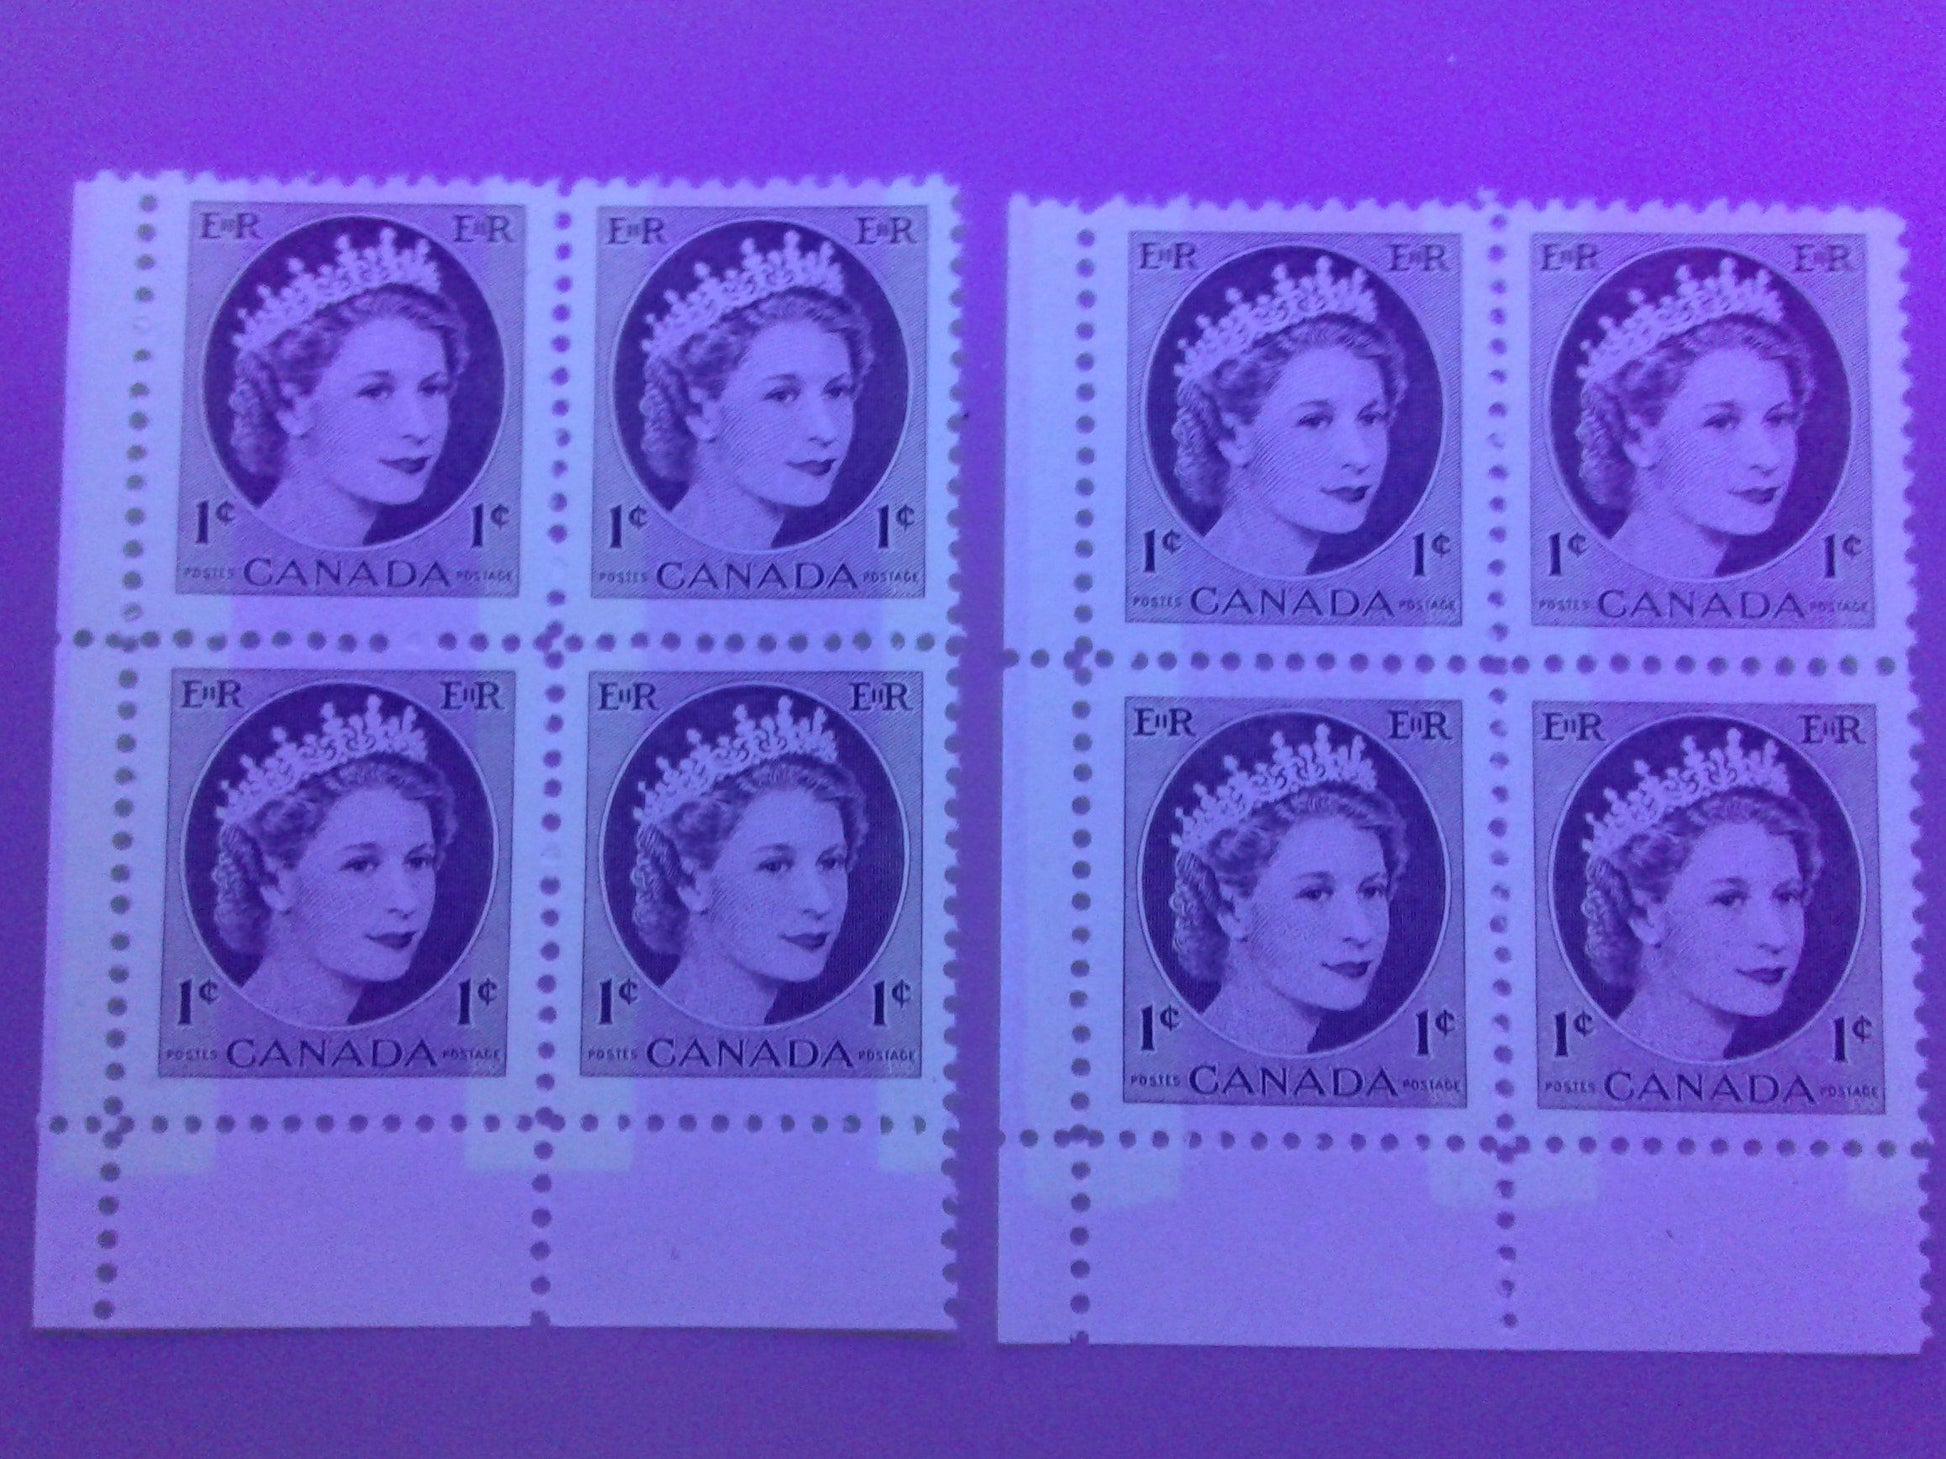 Canada #337p(var) 1c Chocolate Queen Elizabeth II, 1954-1962 Wilding Issue, Upper Right Blank Winnipeg Tagged Block of 4, Perf. 12 x 11.9, DF Gw Vertically Ribbed Paper, Smooth Semi-Gloss Gum, Bluish White Tagging With Extra Streak, VFNH Brixton Chrome 